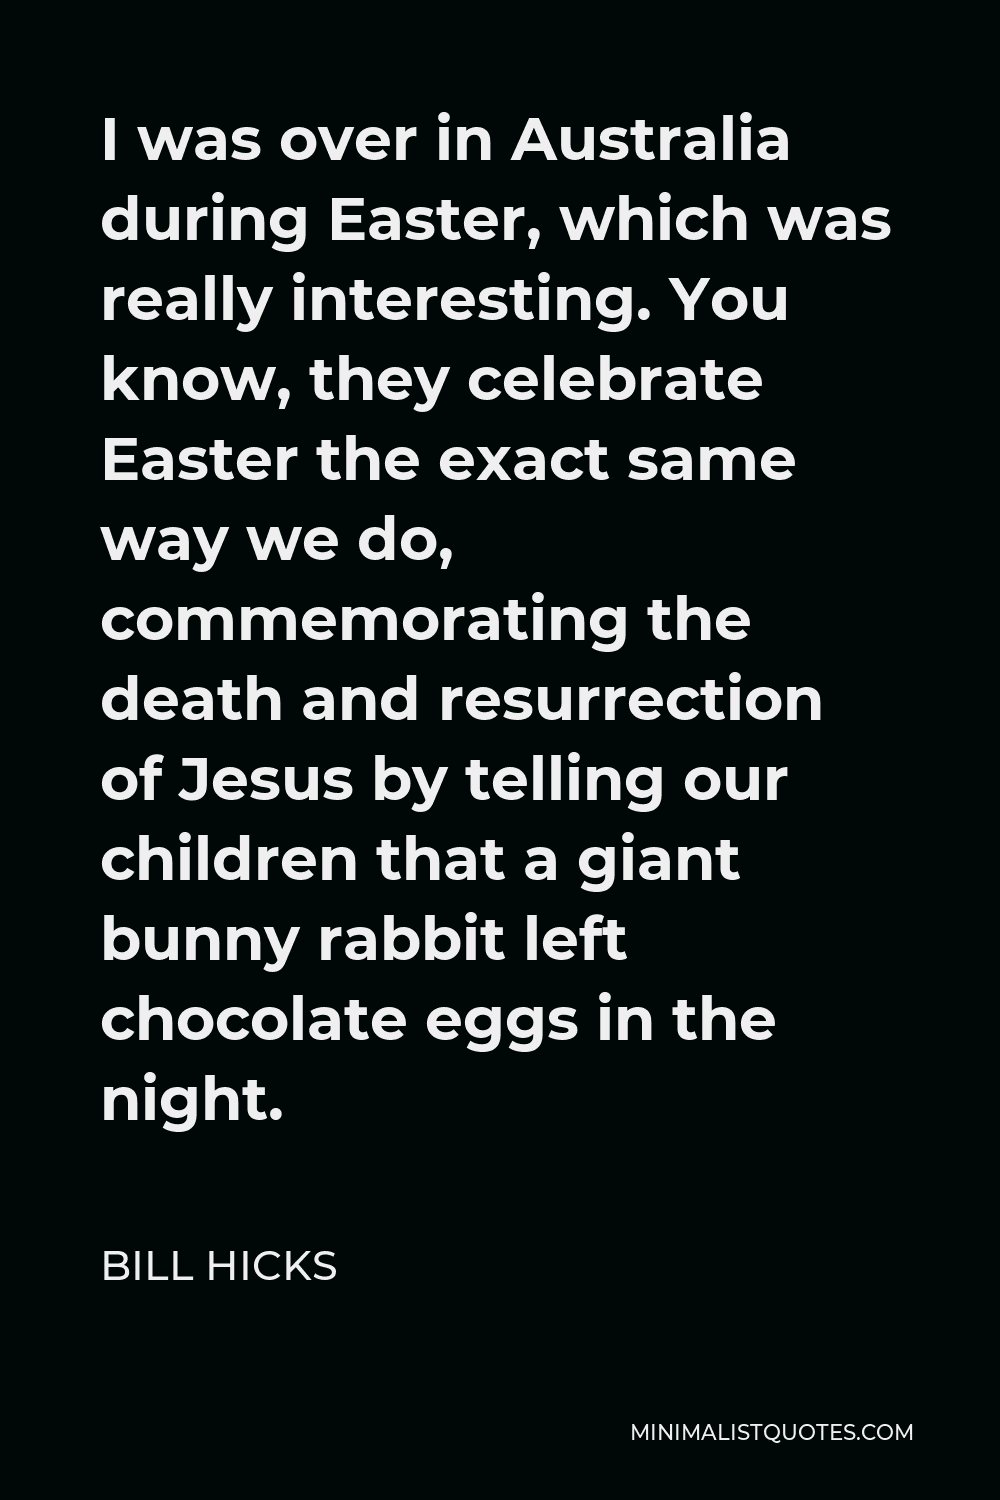 Bill Hicks Quote - I was over in Australia during Easter, which was really interesting. You know, they celebrate Easter the exact same way we do, commemorating the death and resurrection of Jesus by telling our children that a giant bunny rabbit left chocolate eggs in the night.